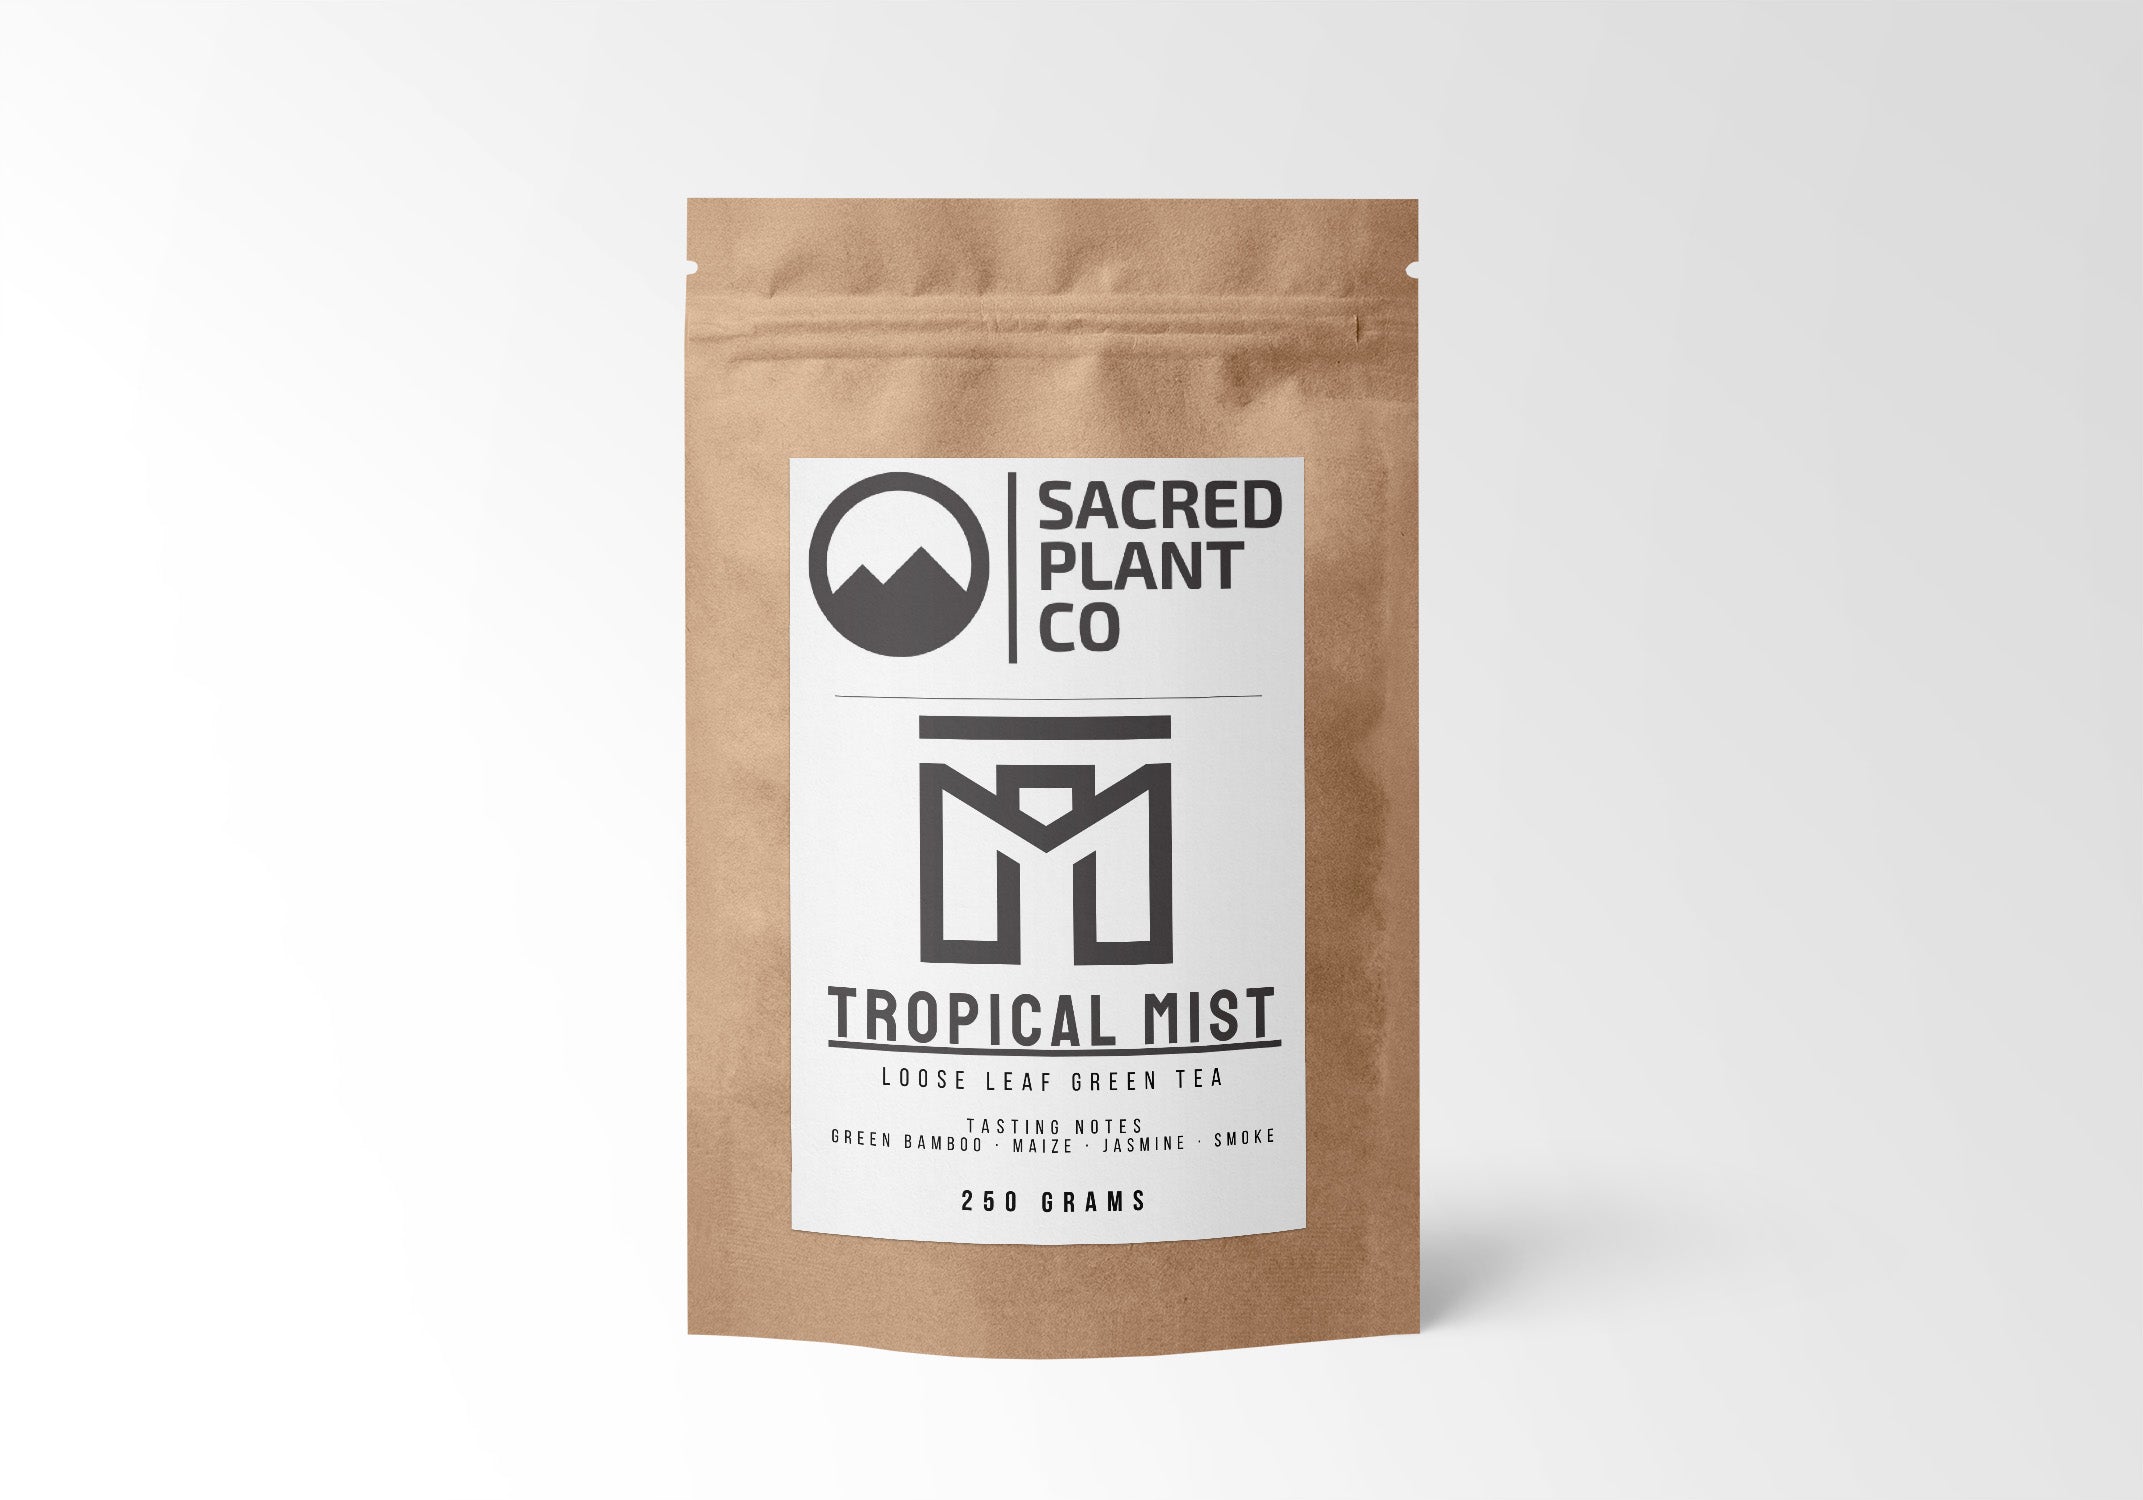 The 250-gram package of Tropical Mist loose leaf green tea from Sacred Plant Co, offering a serene tea experience with natural flavors.